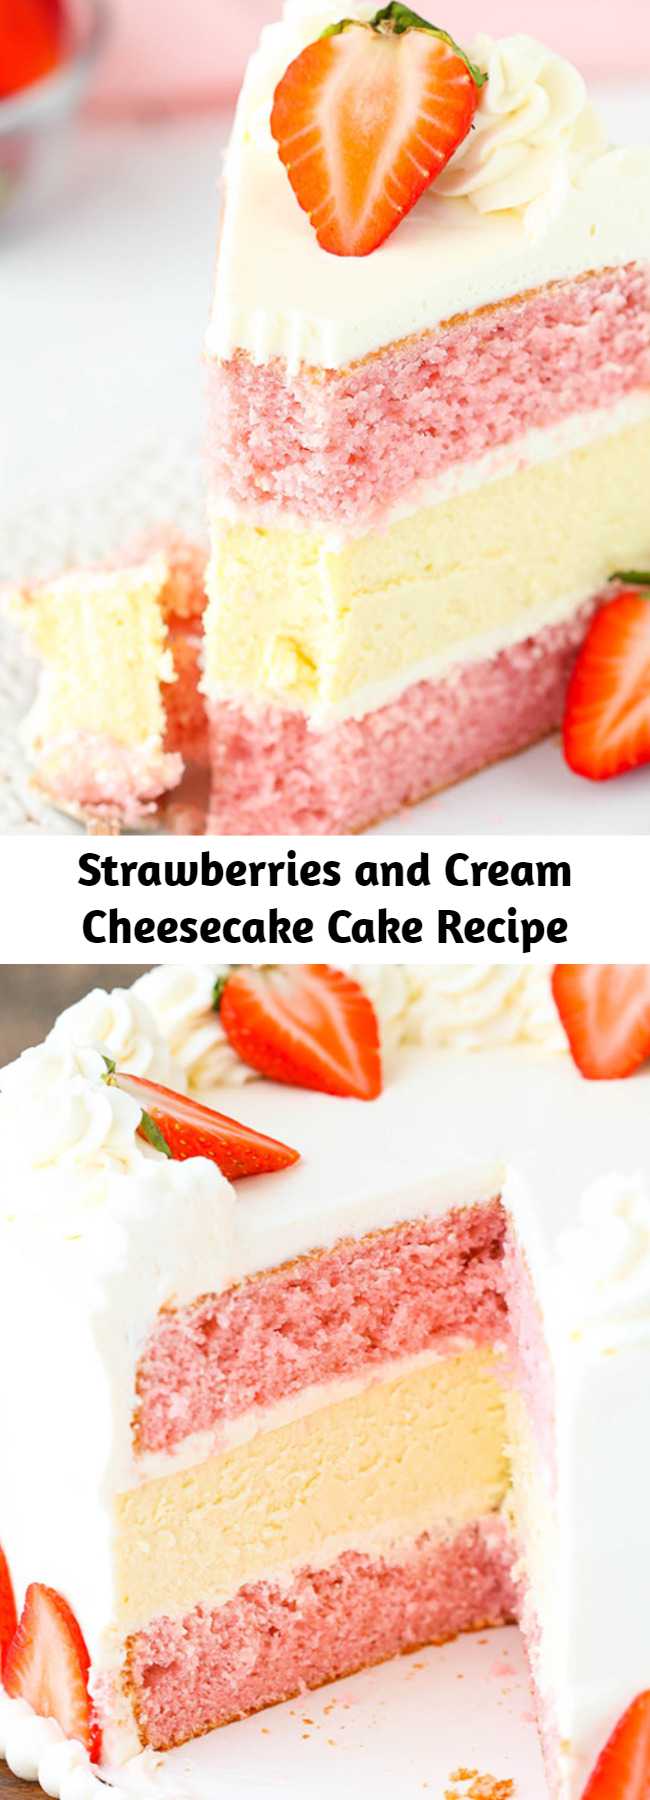 Strawberries and Cream Cheesecake Cake Recipe - This Strawberries and Cream Cheesecake Cake is perfect in every way! With two layers of strawberry cake and a creamy layer of vanilla cheesecake in the middle, this cake is no joke.